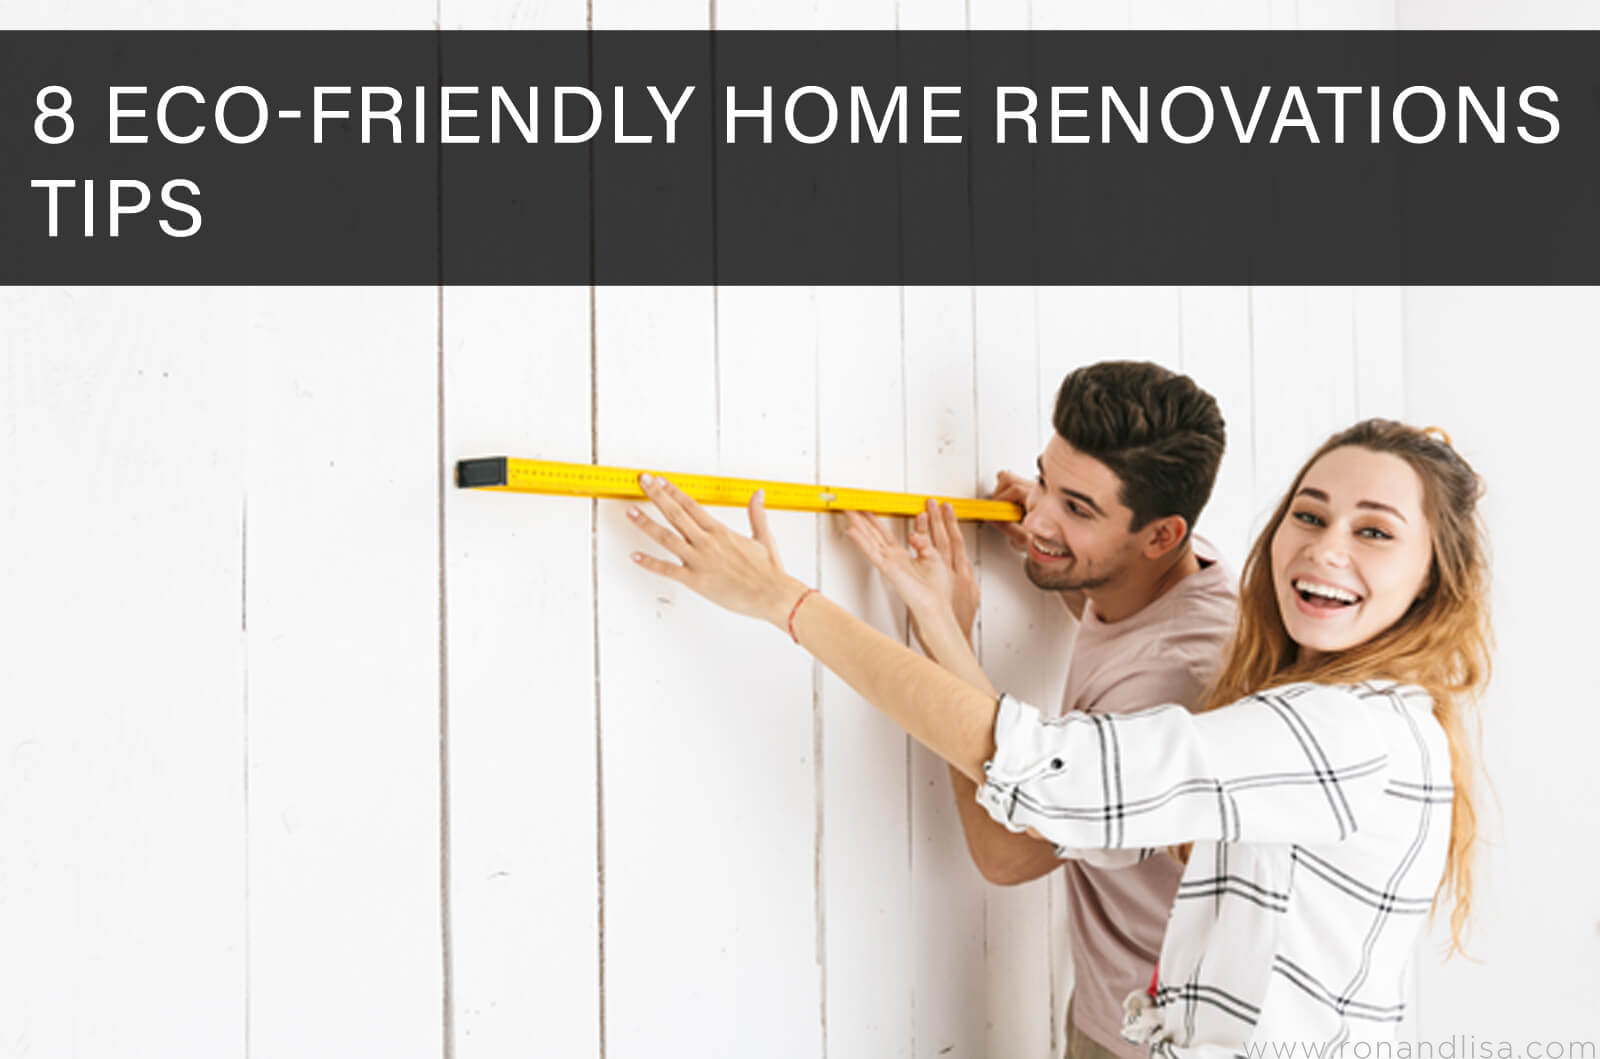 8 Eco-Friendly Home Renovations Tips